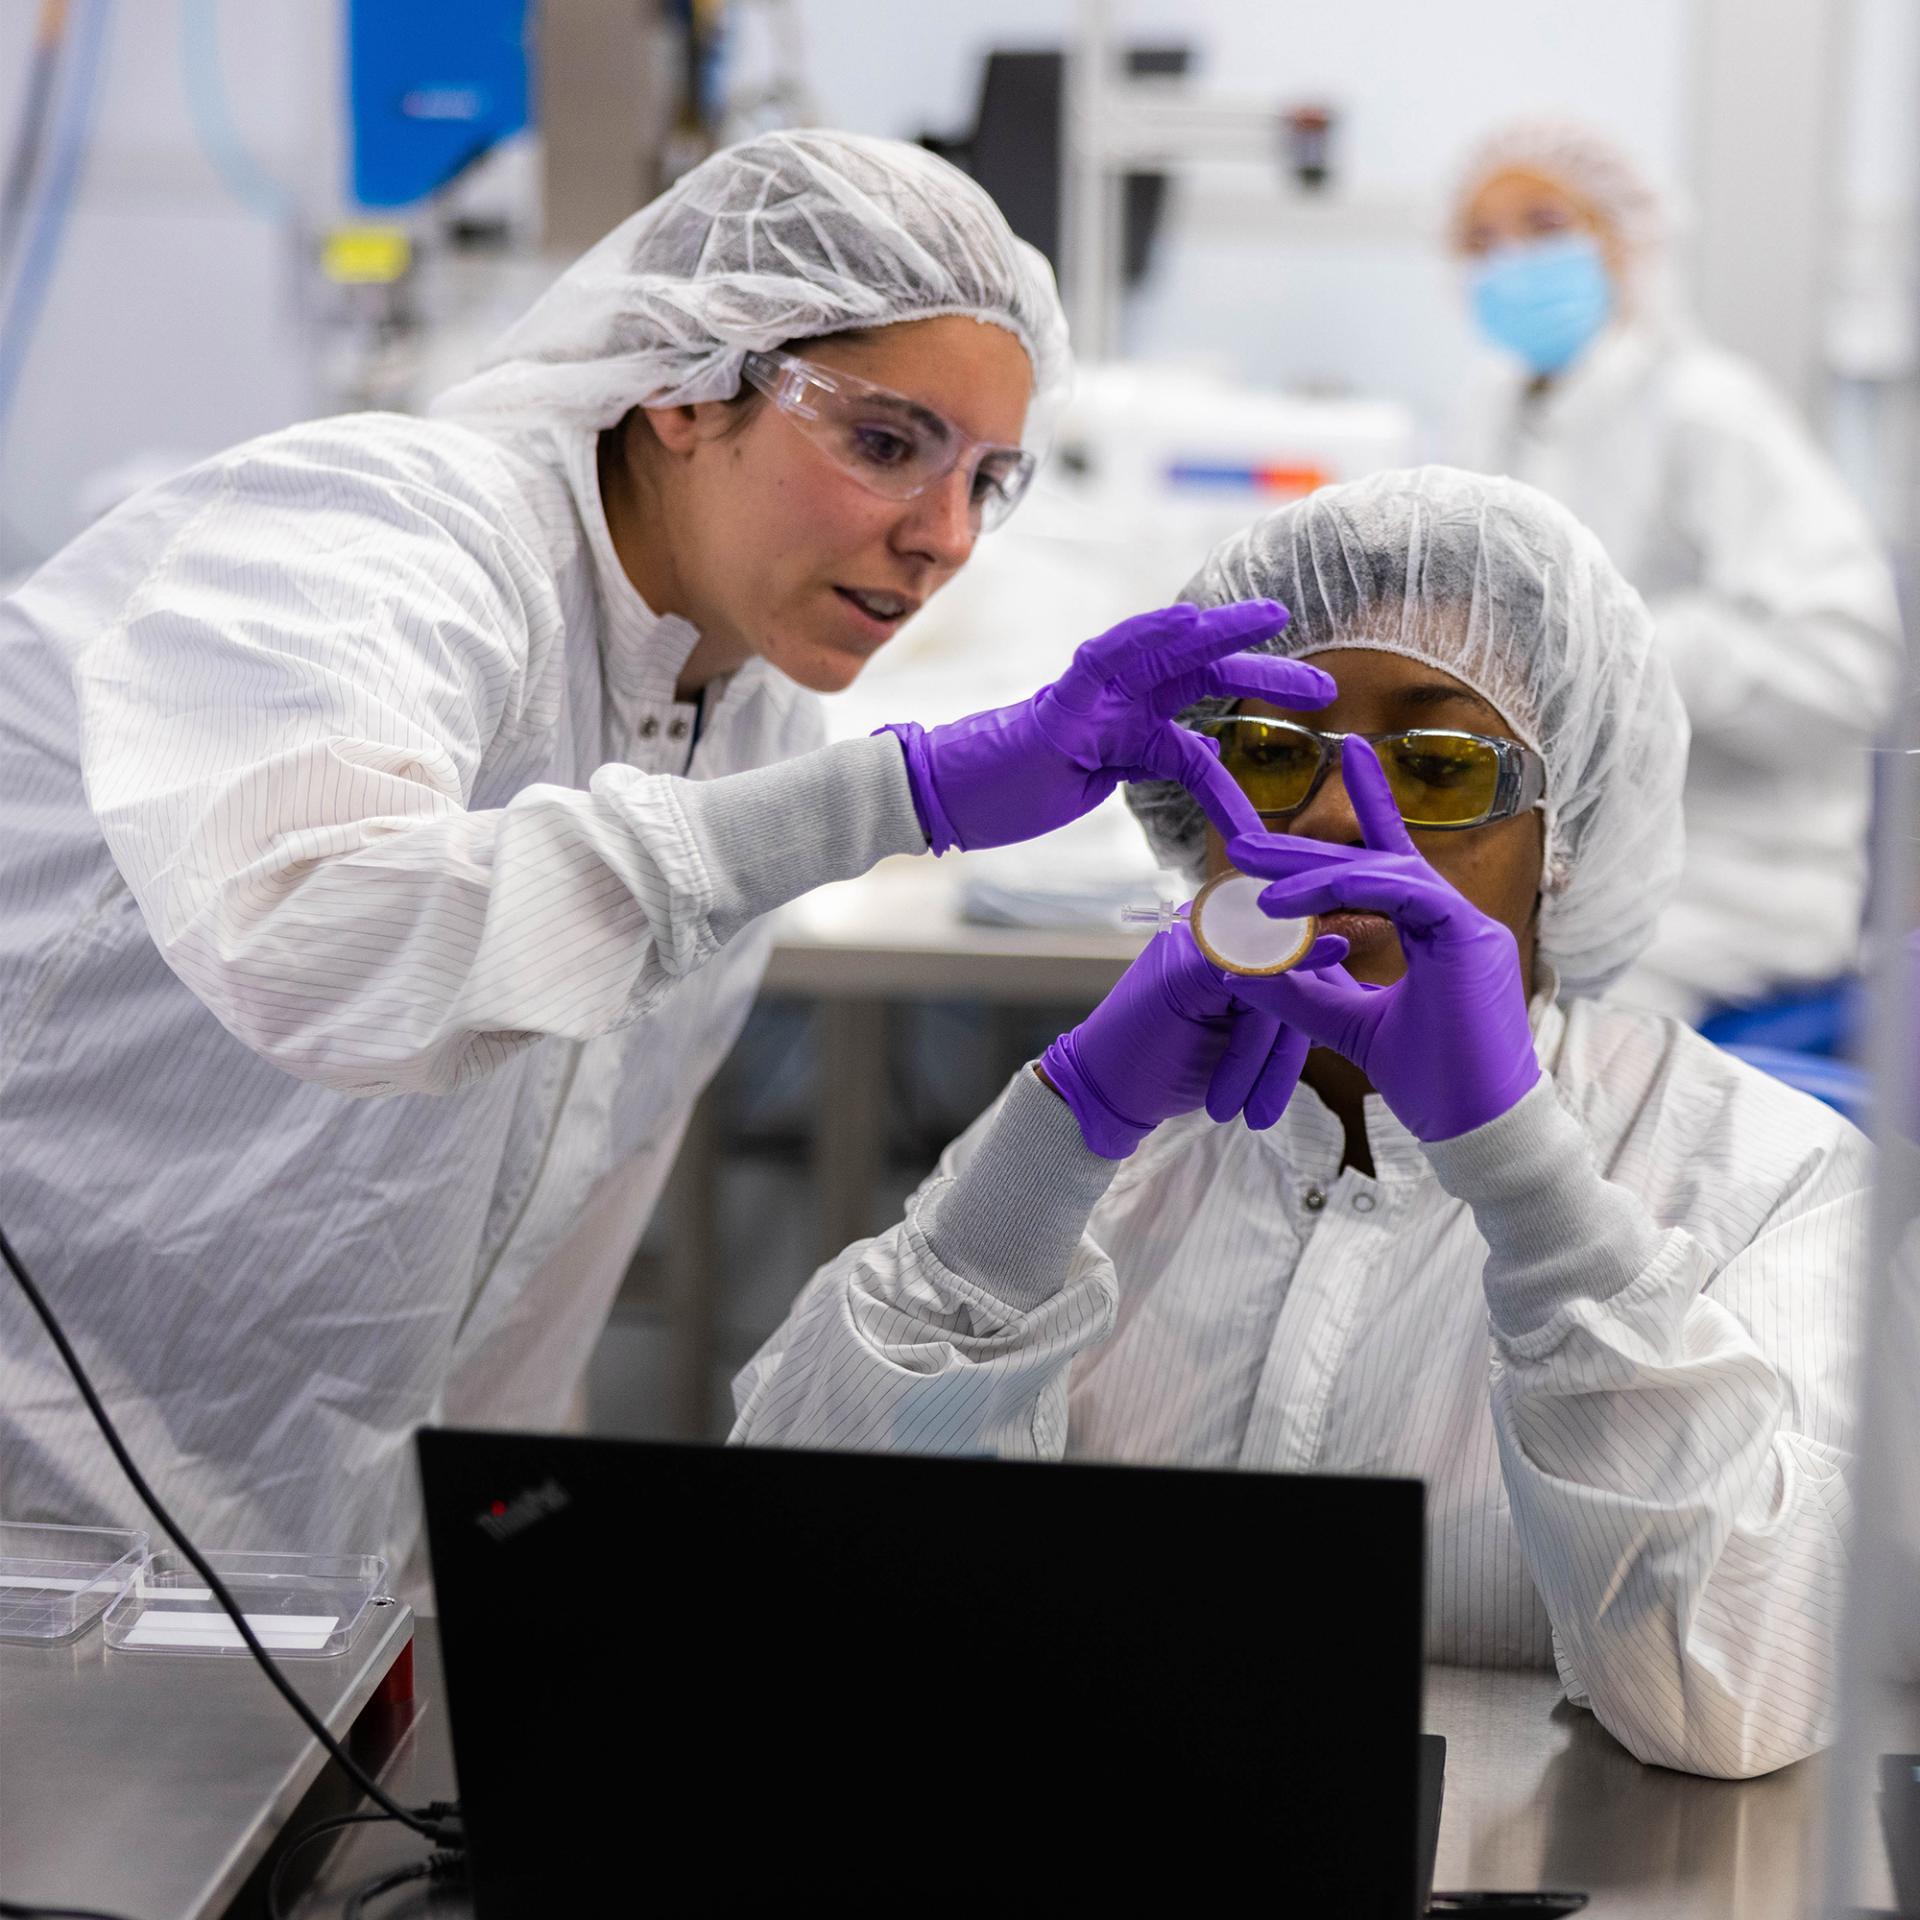 An image of two Vertex scientists in lab coats examining an experiment in the lab